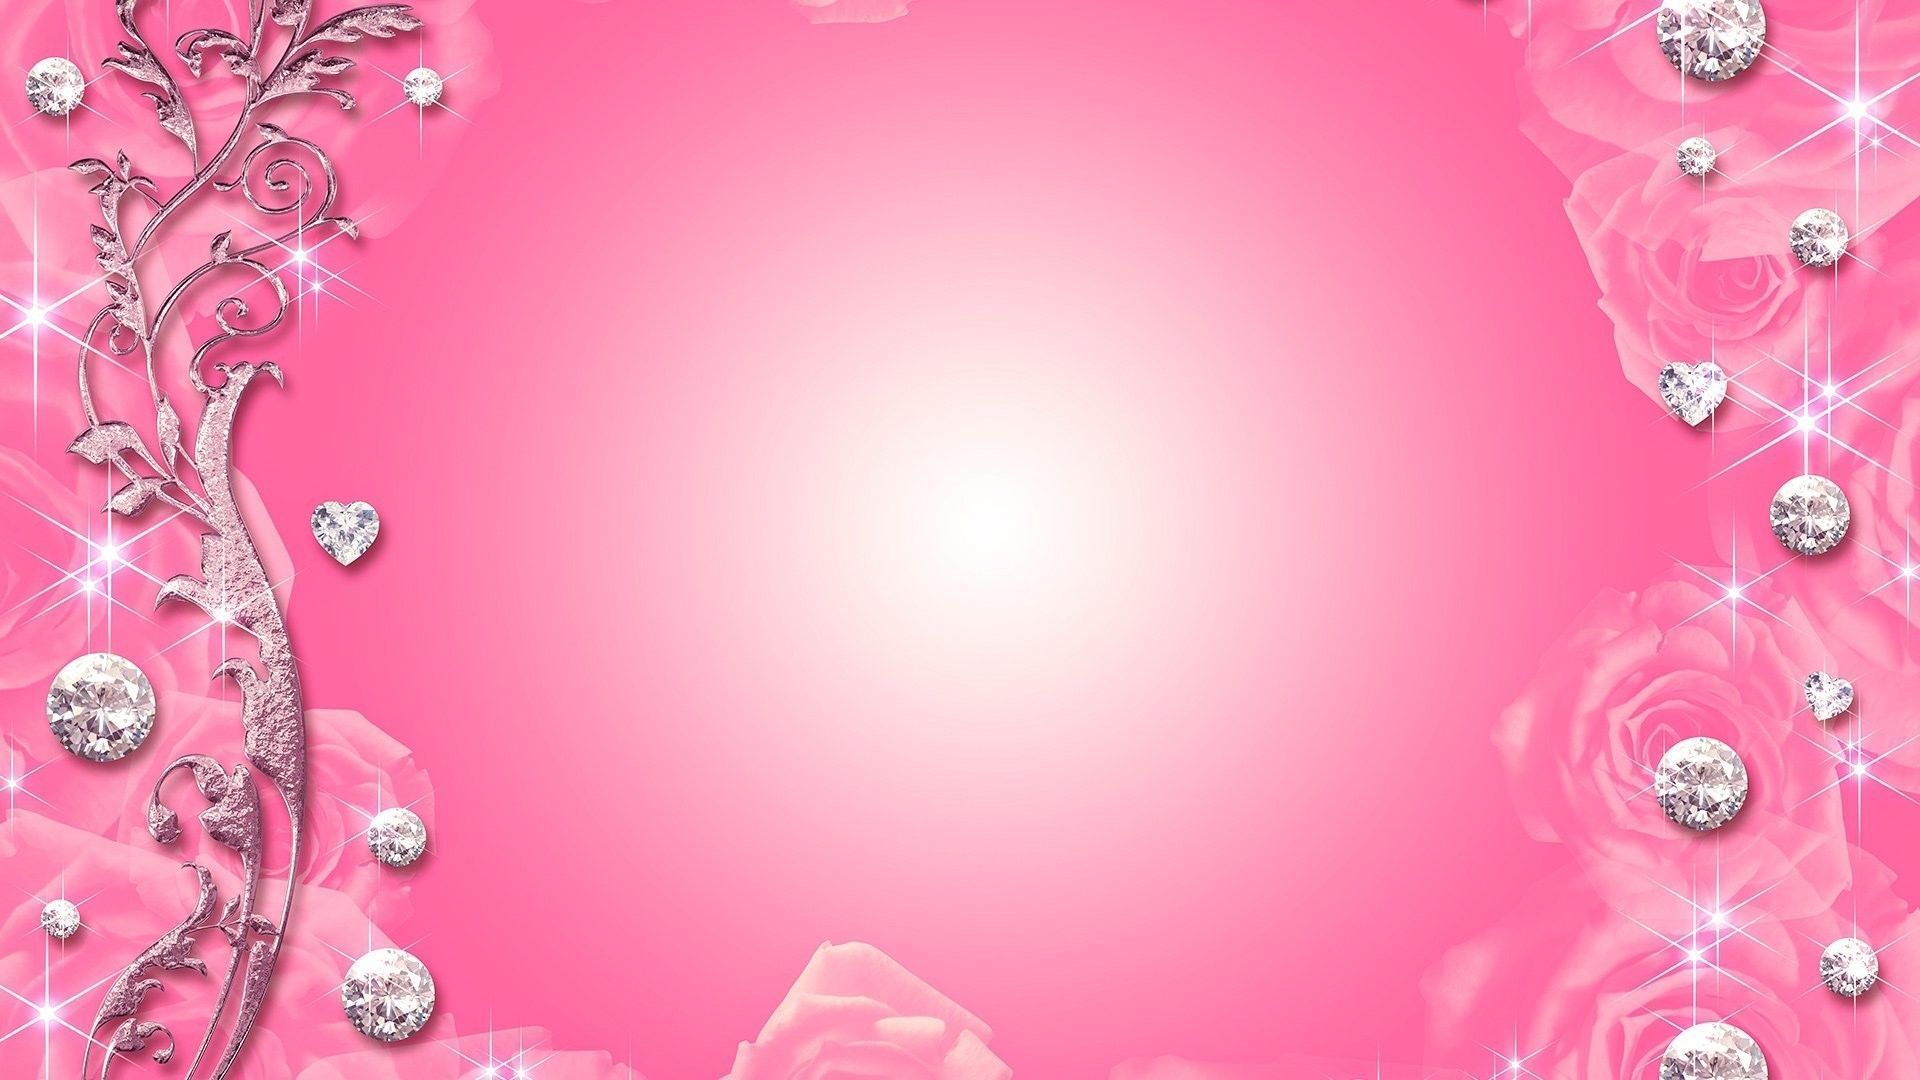 Pink Wallpaper - Backgrounds Free Images